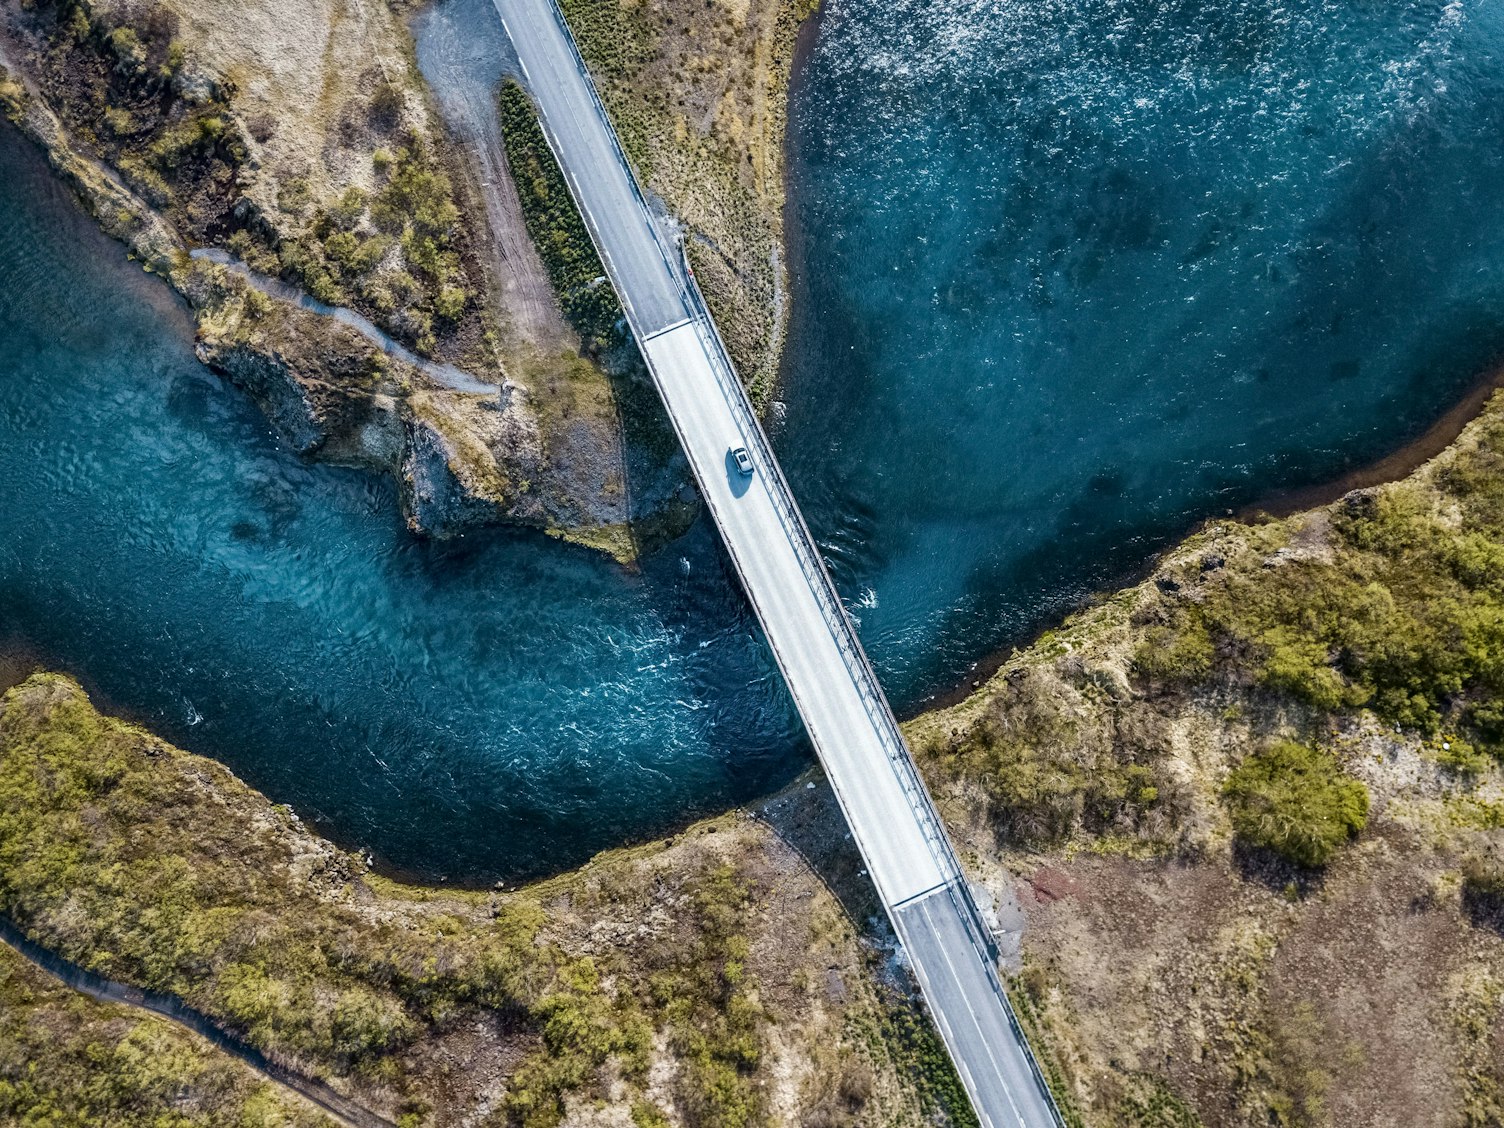 Aerial View of a Bridge over Deep Blue Water